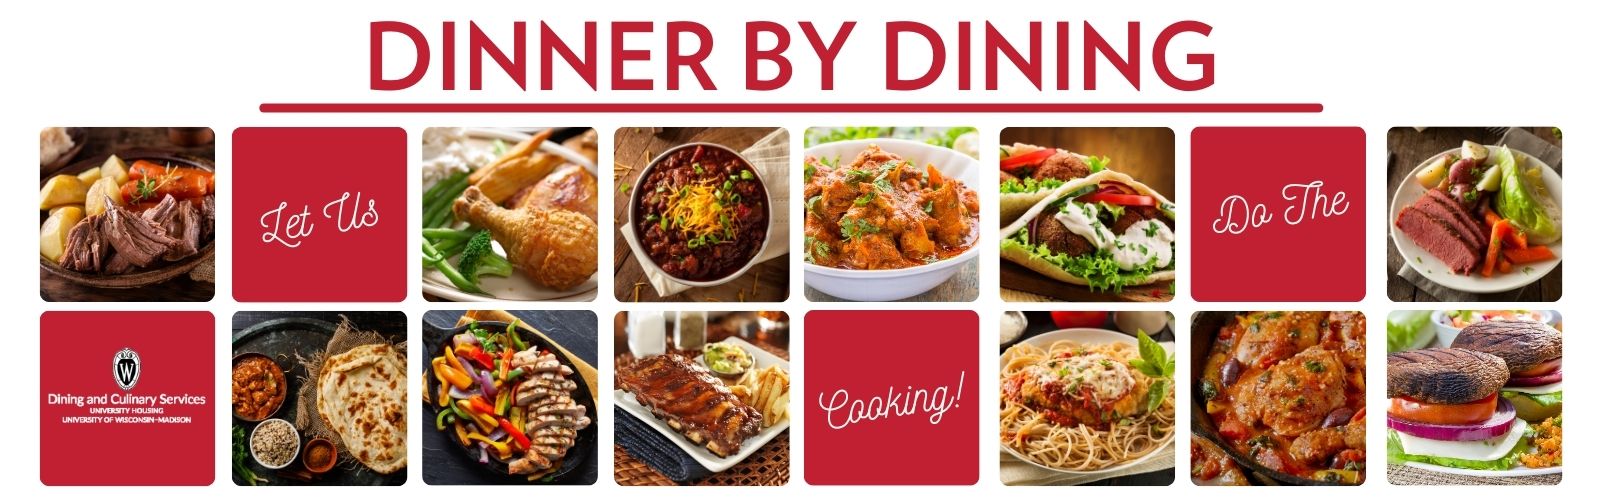 Dinner by Dining Web Banner